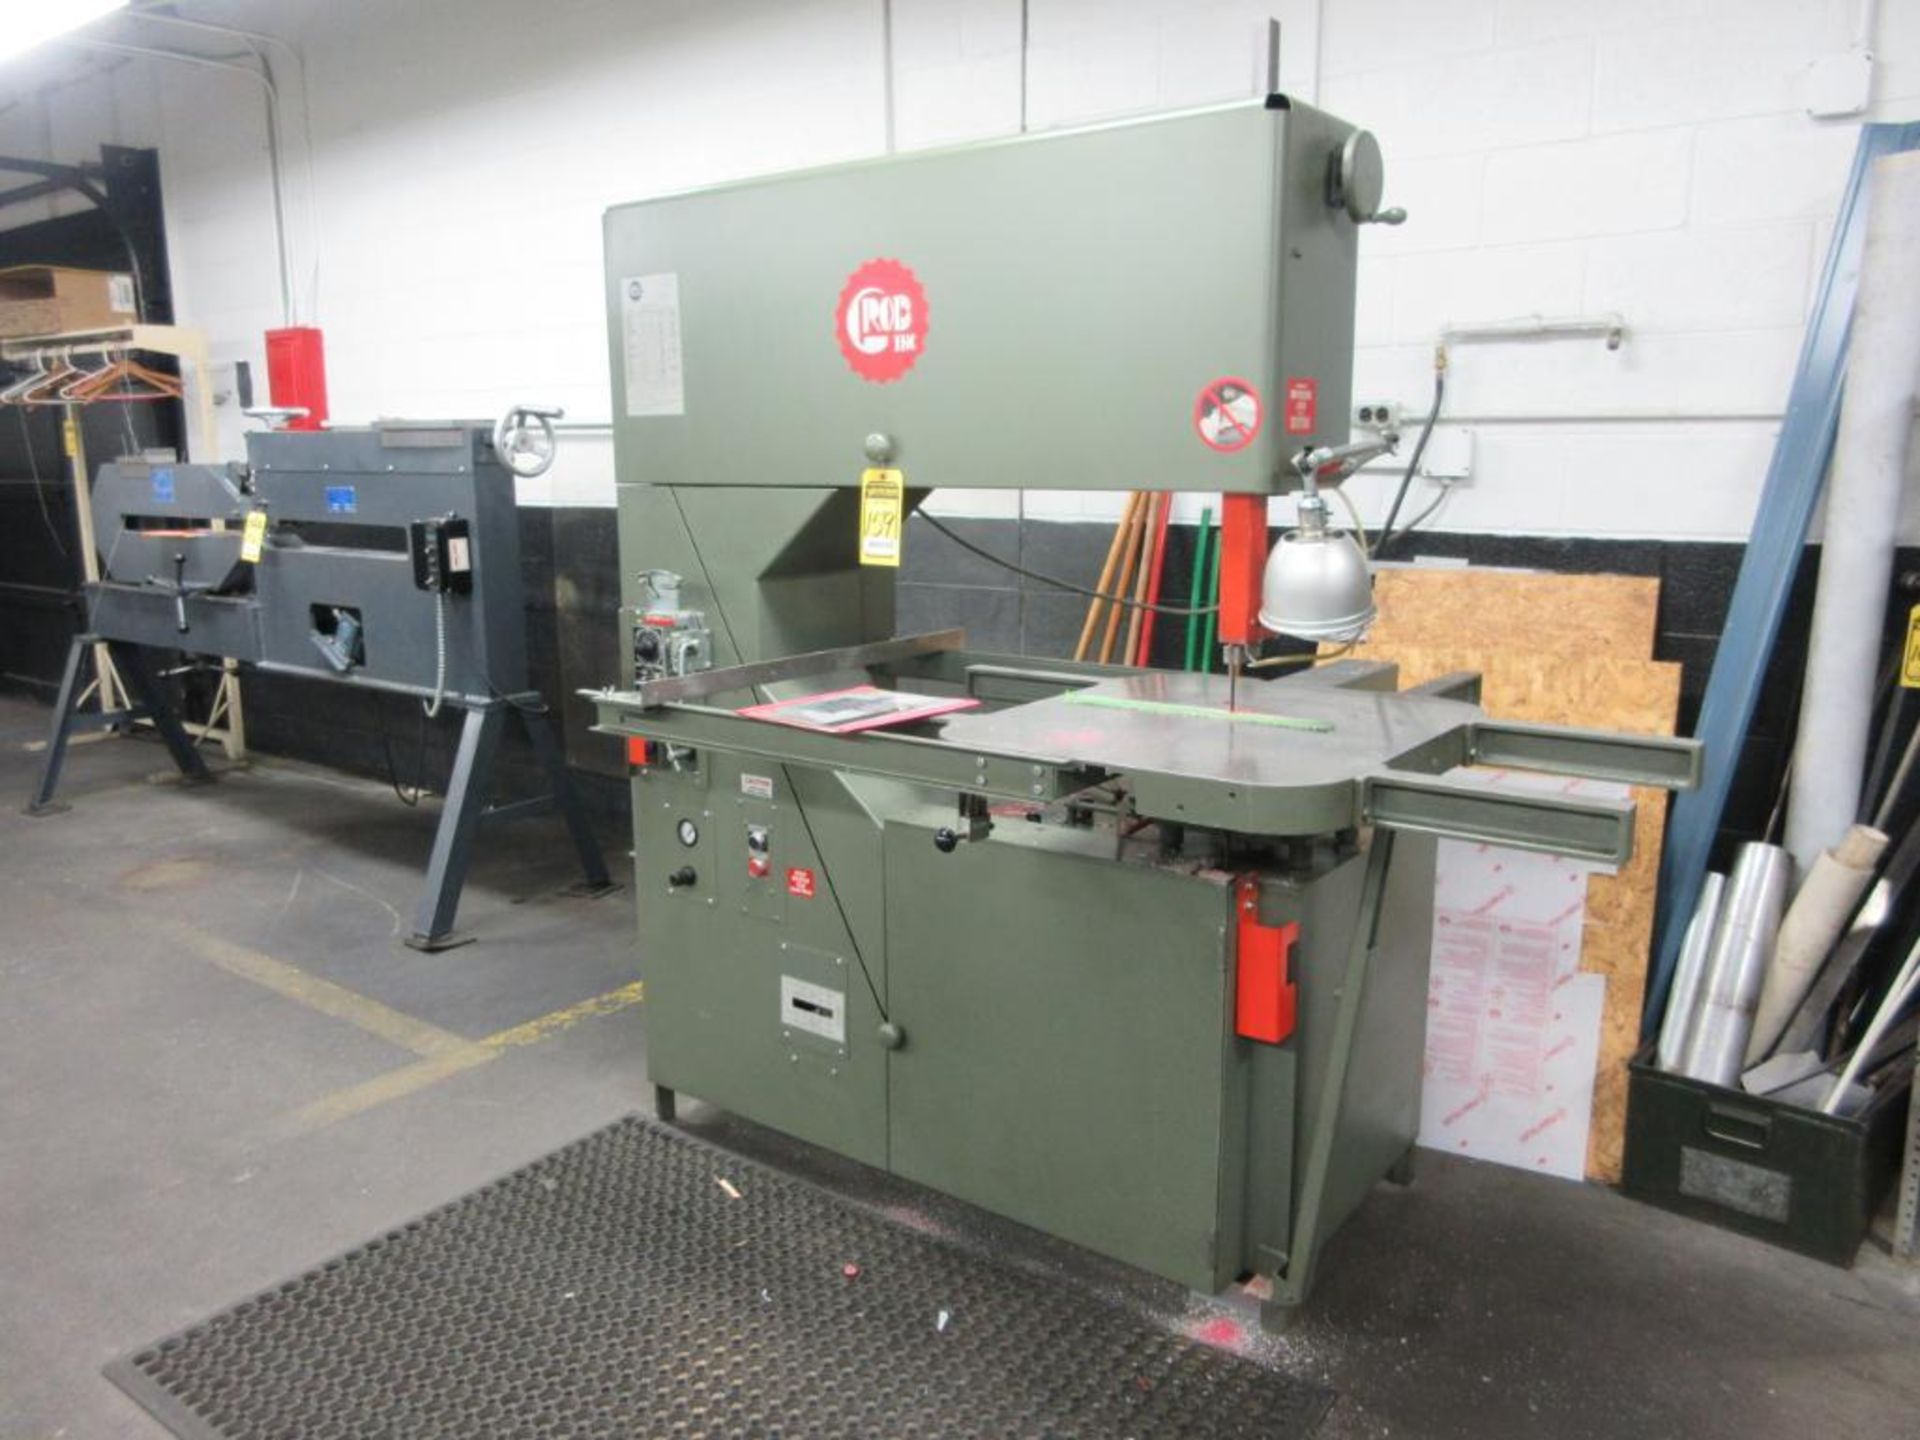 1996 GROB VERTICAL BAND SAW, MODEL 4V-36, S/N 1859, 2-SPEEN LOW, 40-420 FPM, 2-SPEED HIGH, 475-